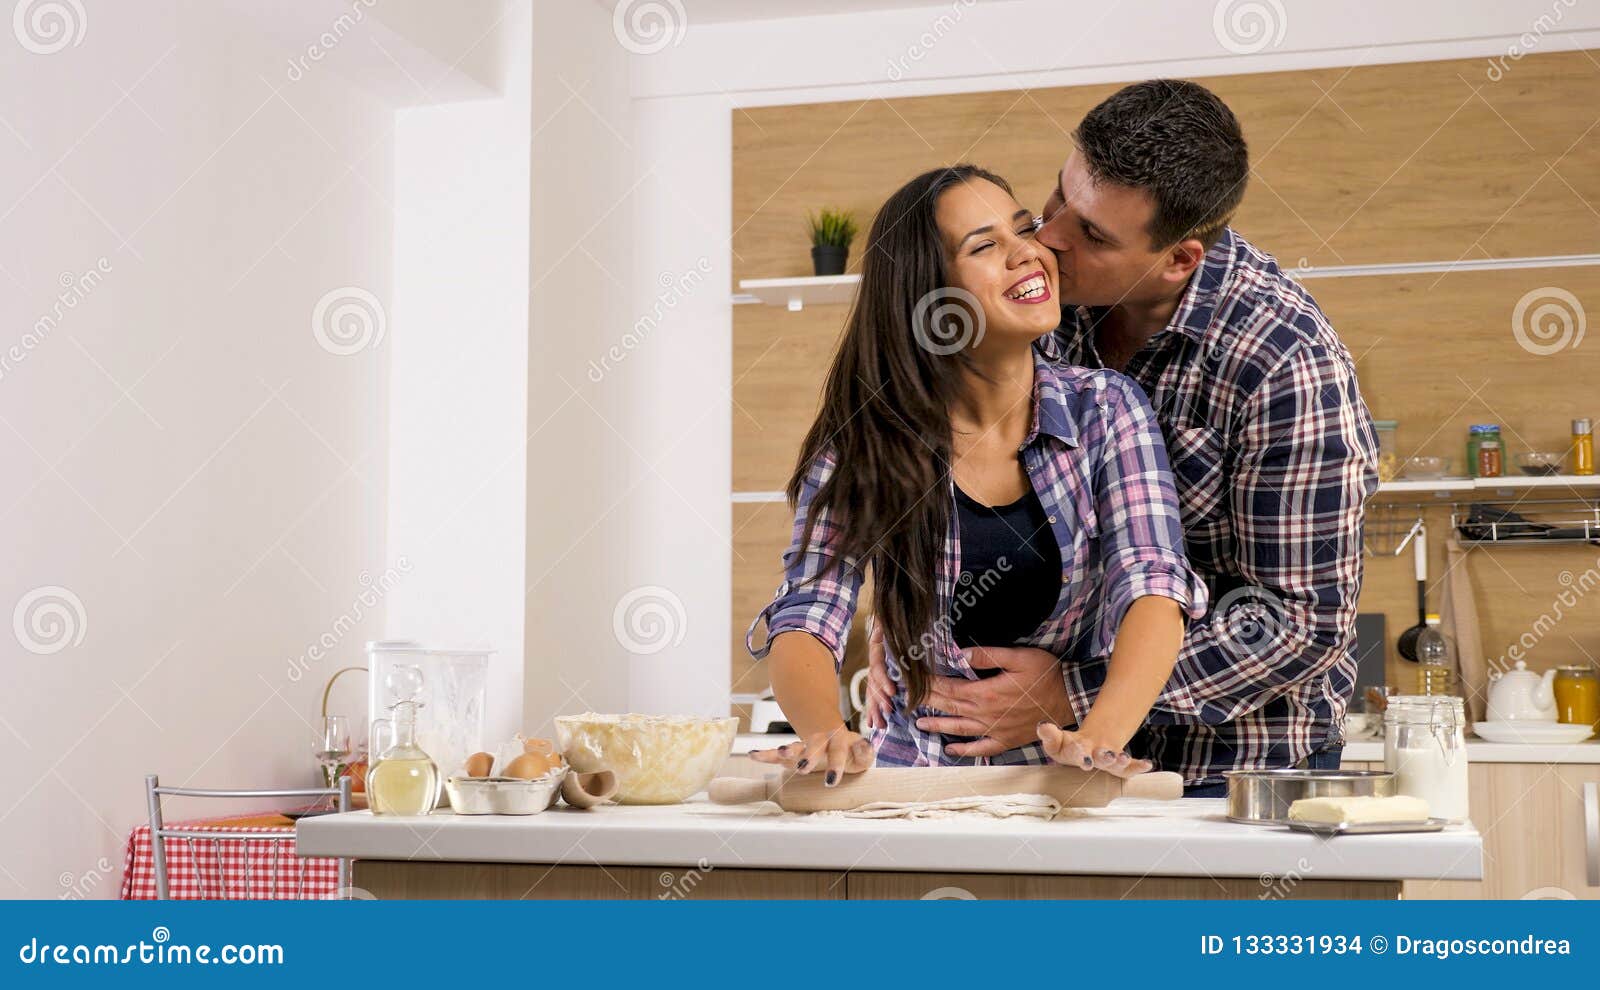 young wife giving affection to her husband while cooking